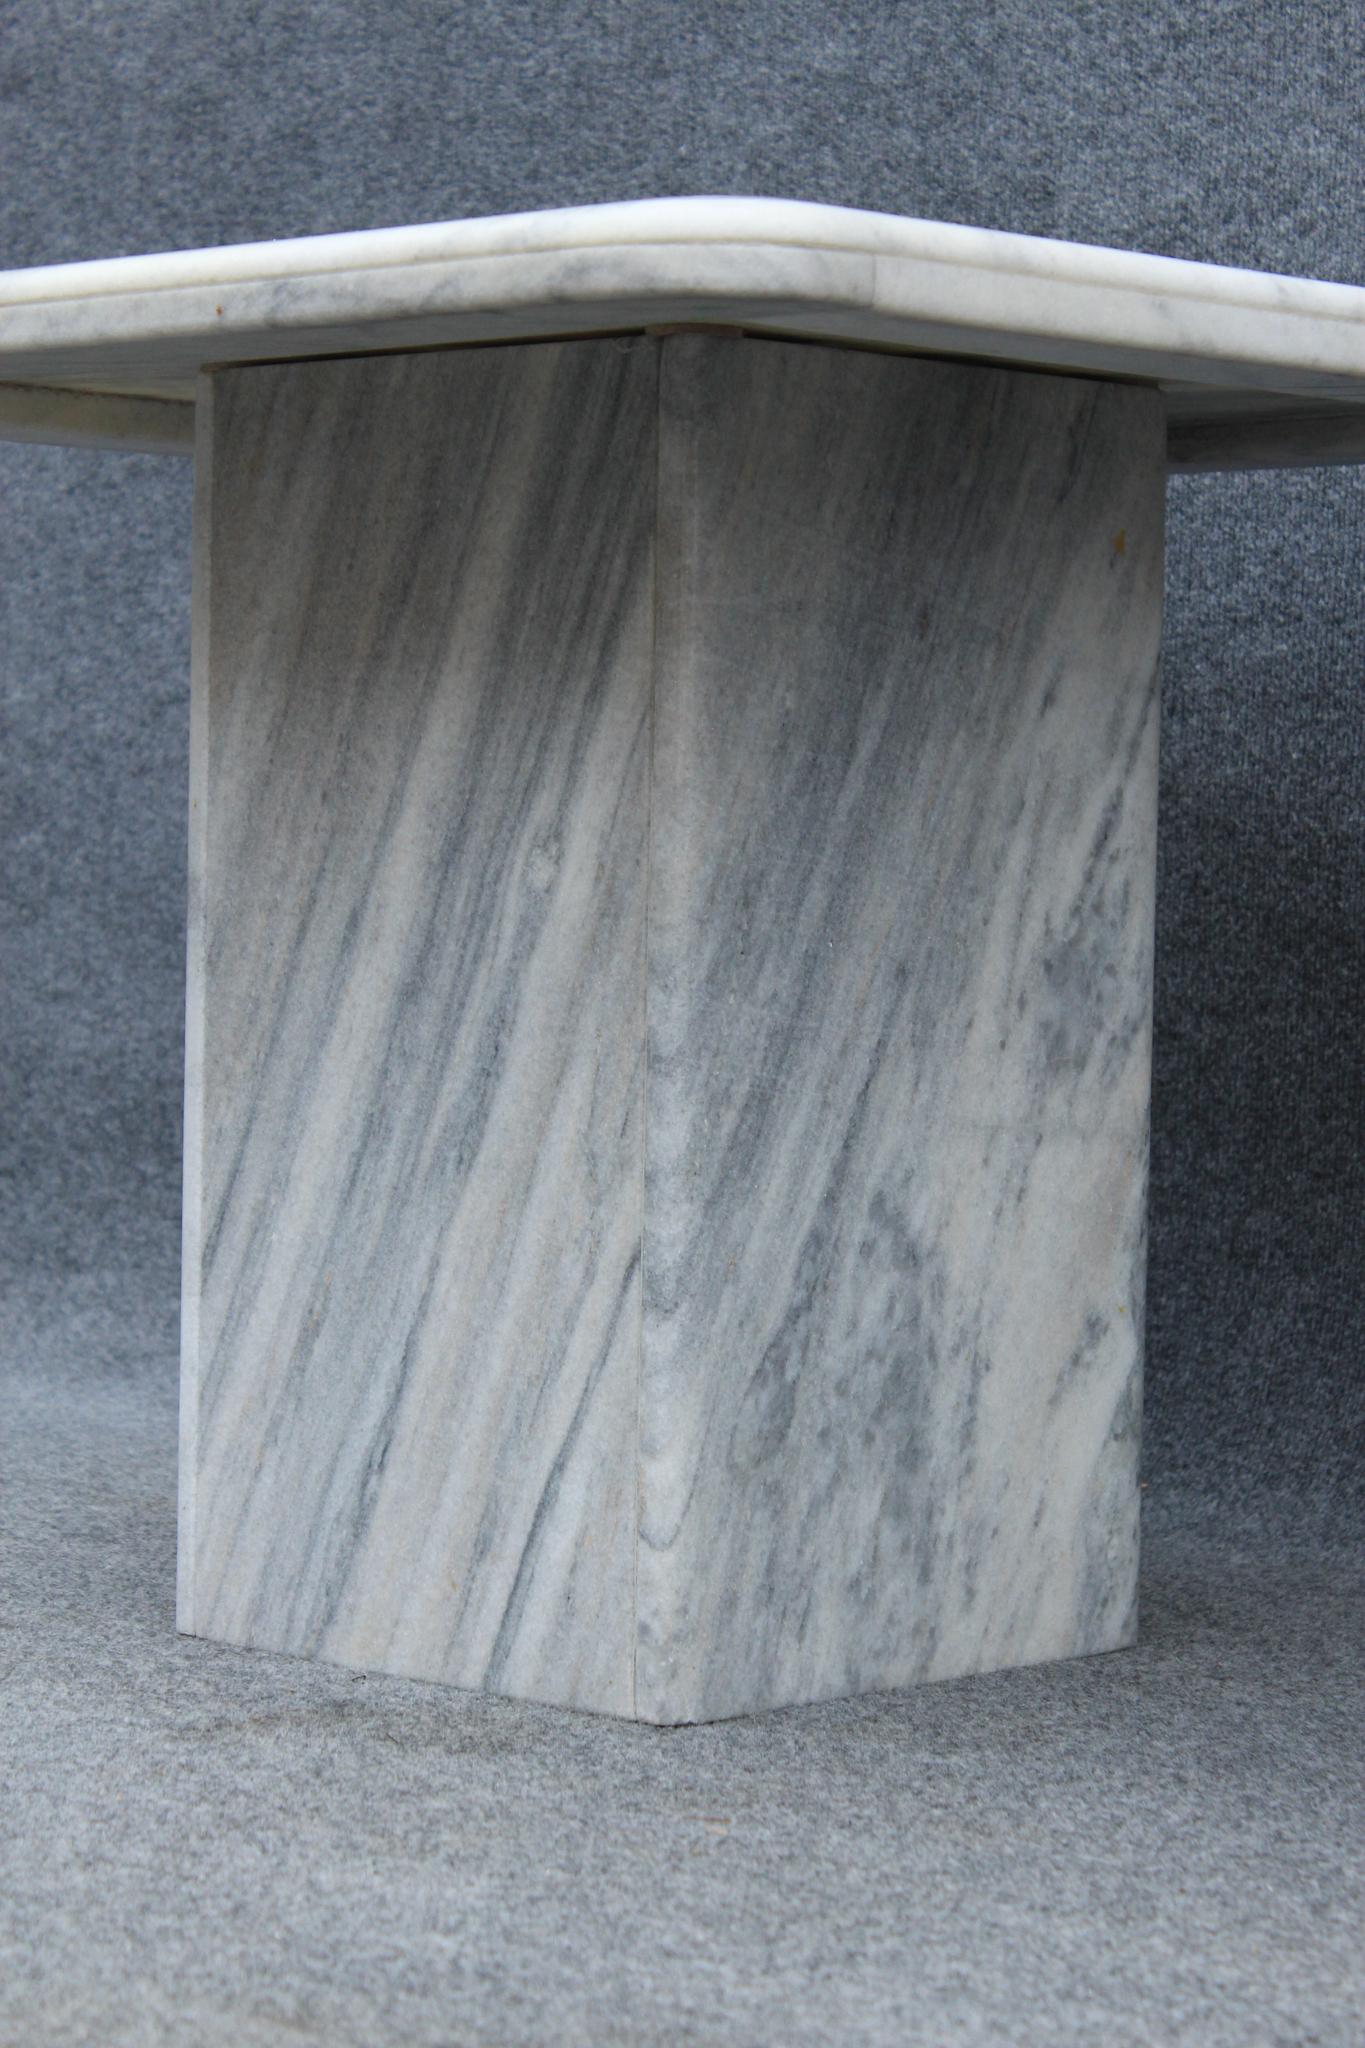 Pair of Italian Side Tables in White Marble With Grey Veining 1970s For Sale 2